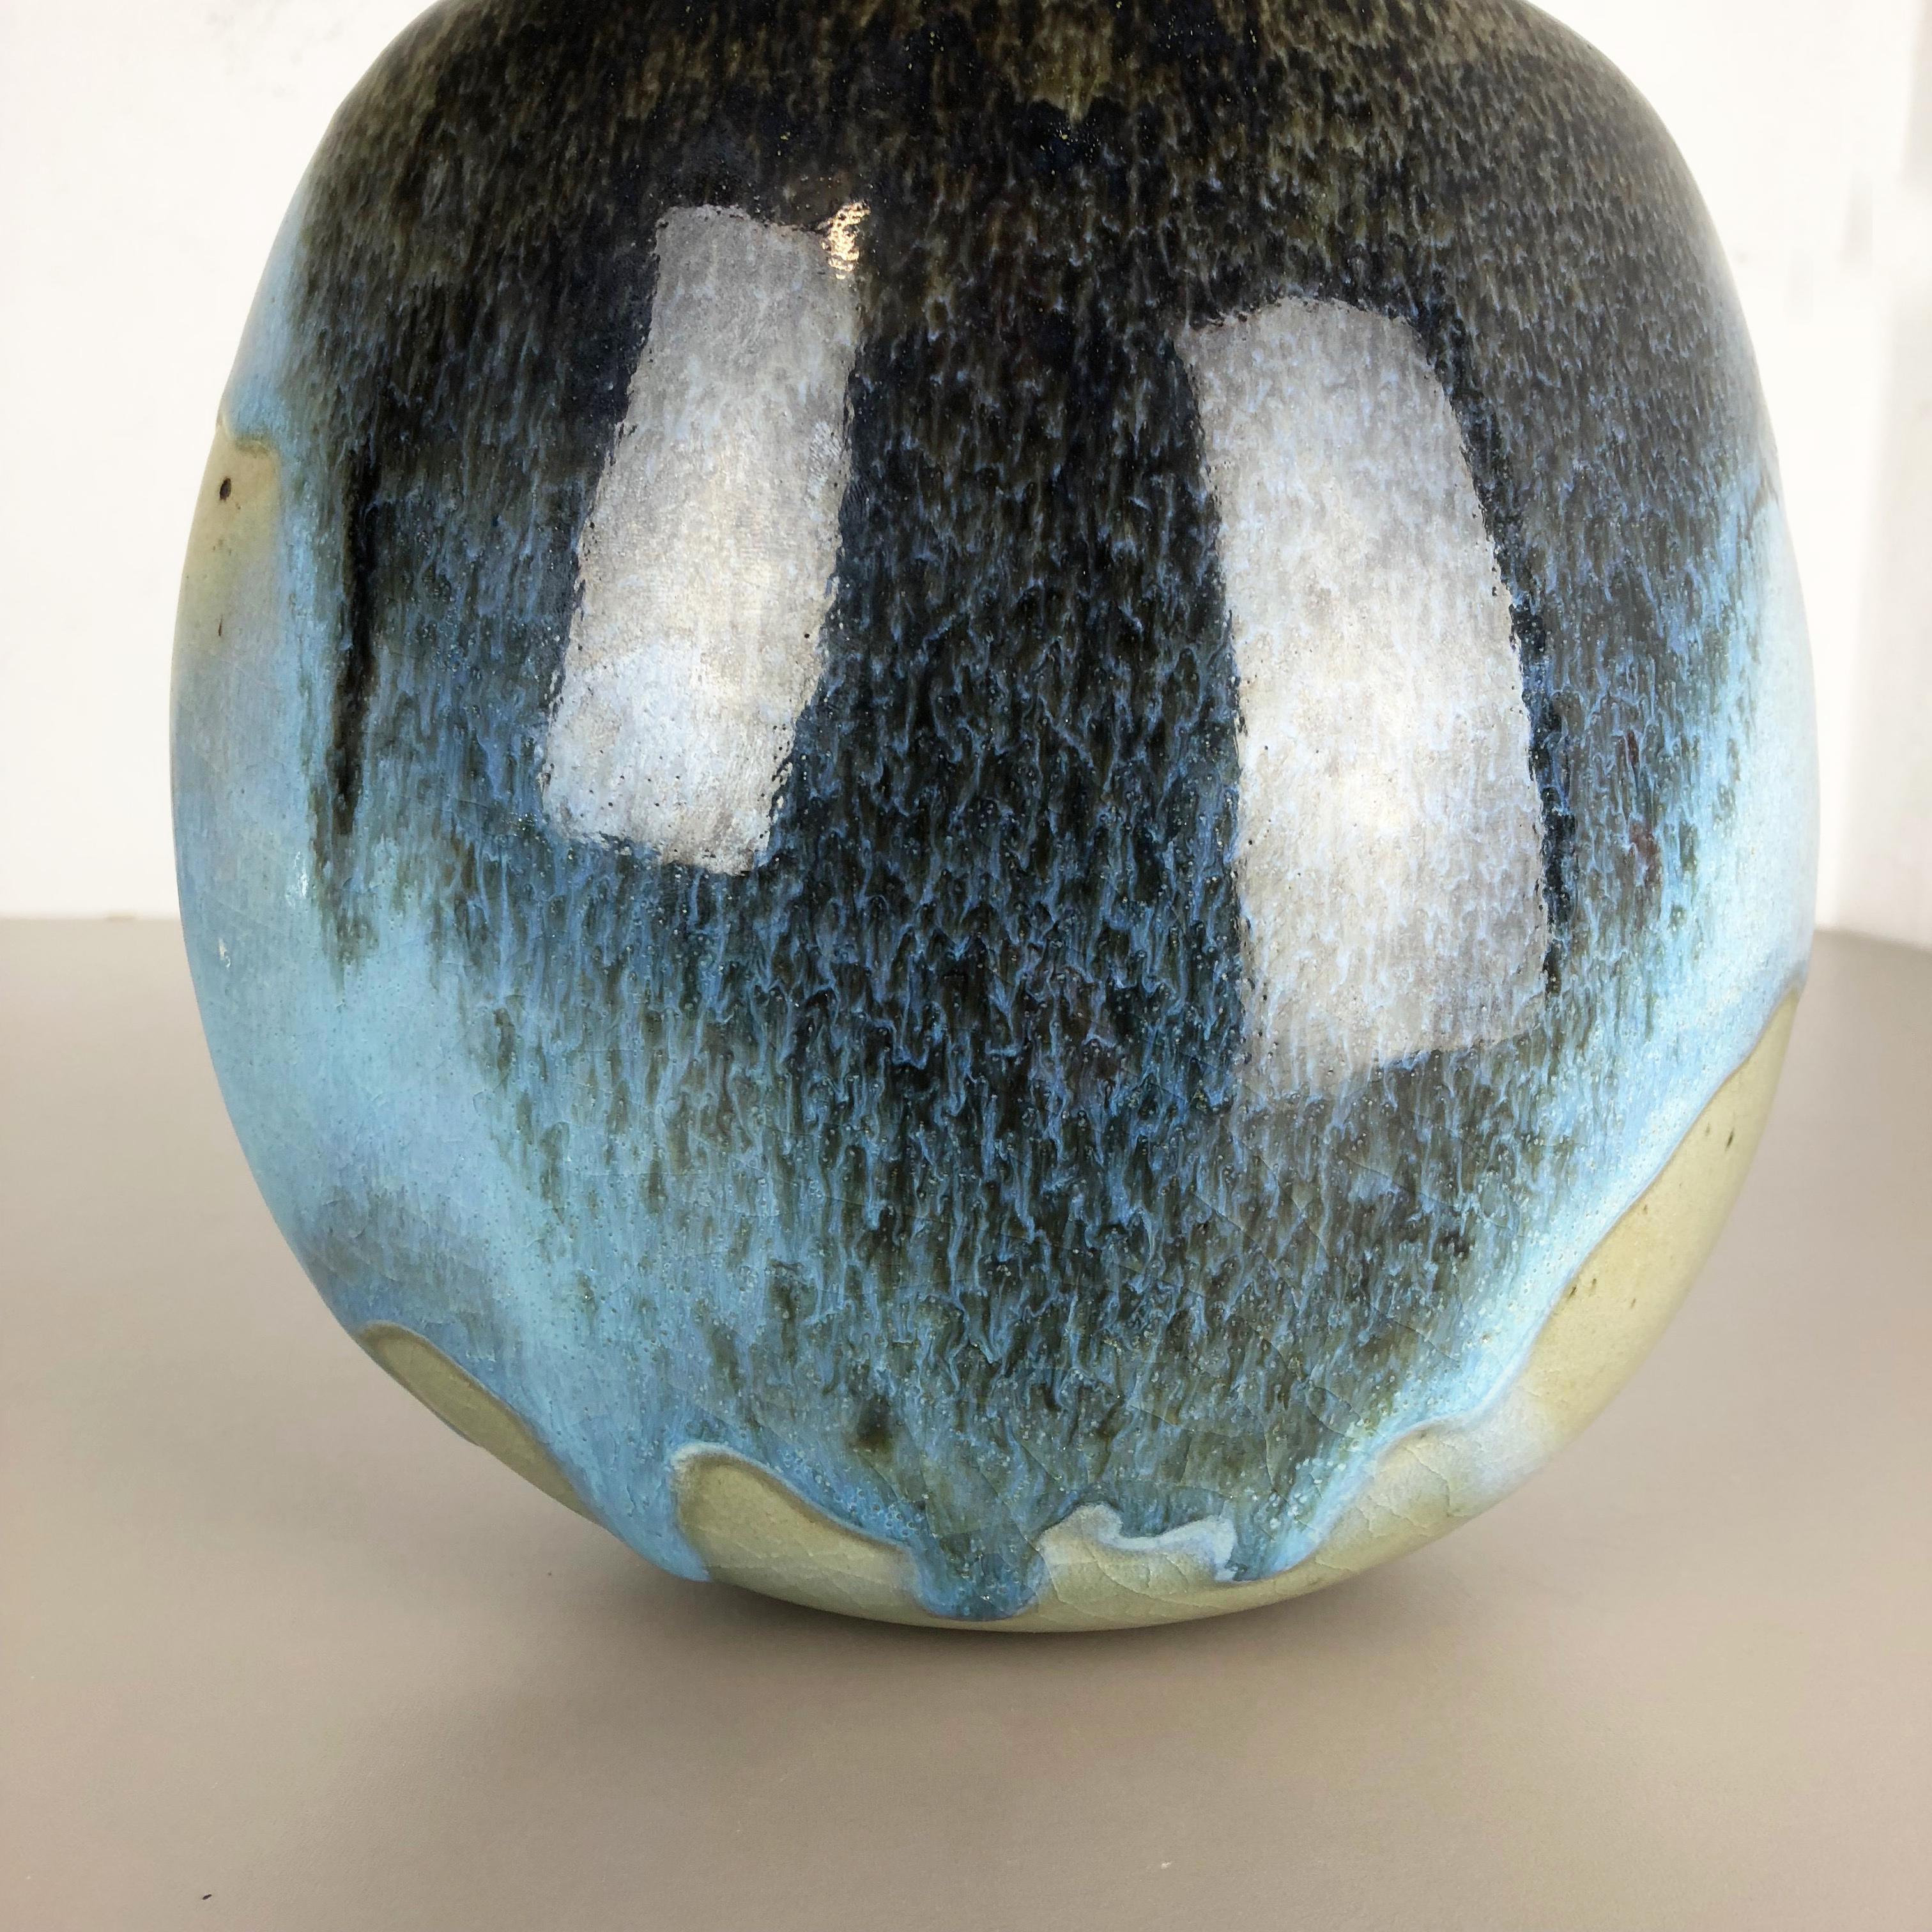 Abstract Ceramic Studio Stoneware Vase by Gotlind Weigel, Germany, 1960s For Sale 4